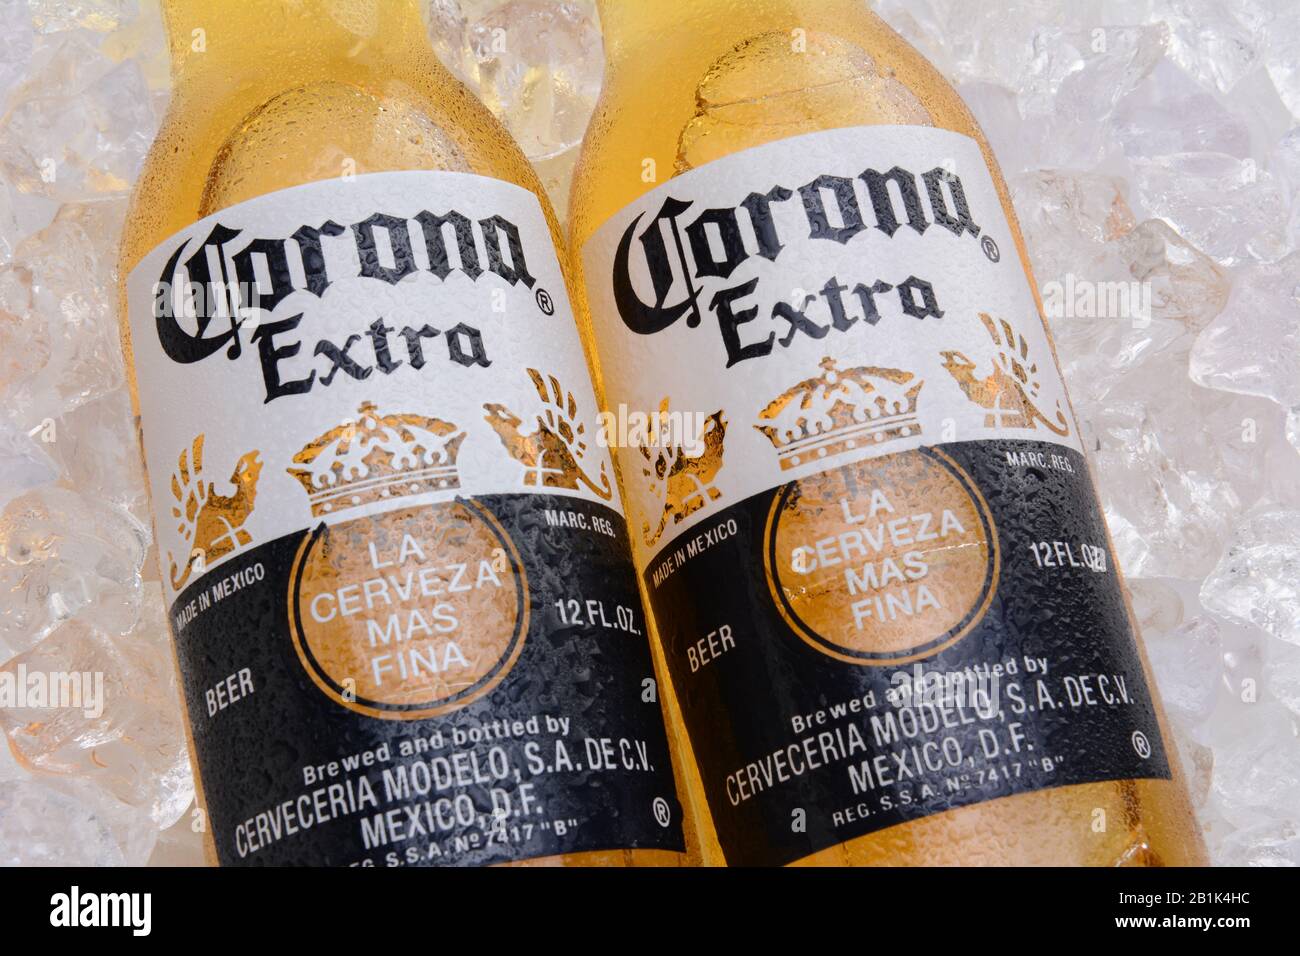 IRVINE, CA - MAY 27, 2014: Two bottles of Corona Extra Beer on a bed of ice. Corona from Grupo Modelo, Anheuser-Busch InBev is the most popular import Stock Photo